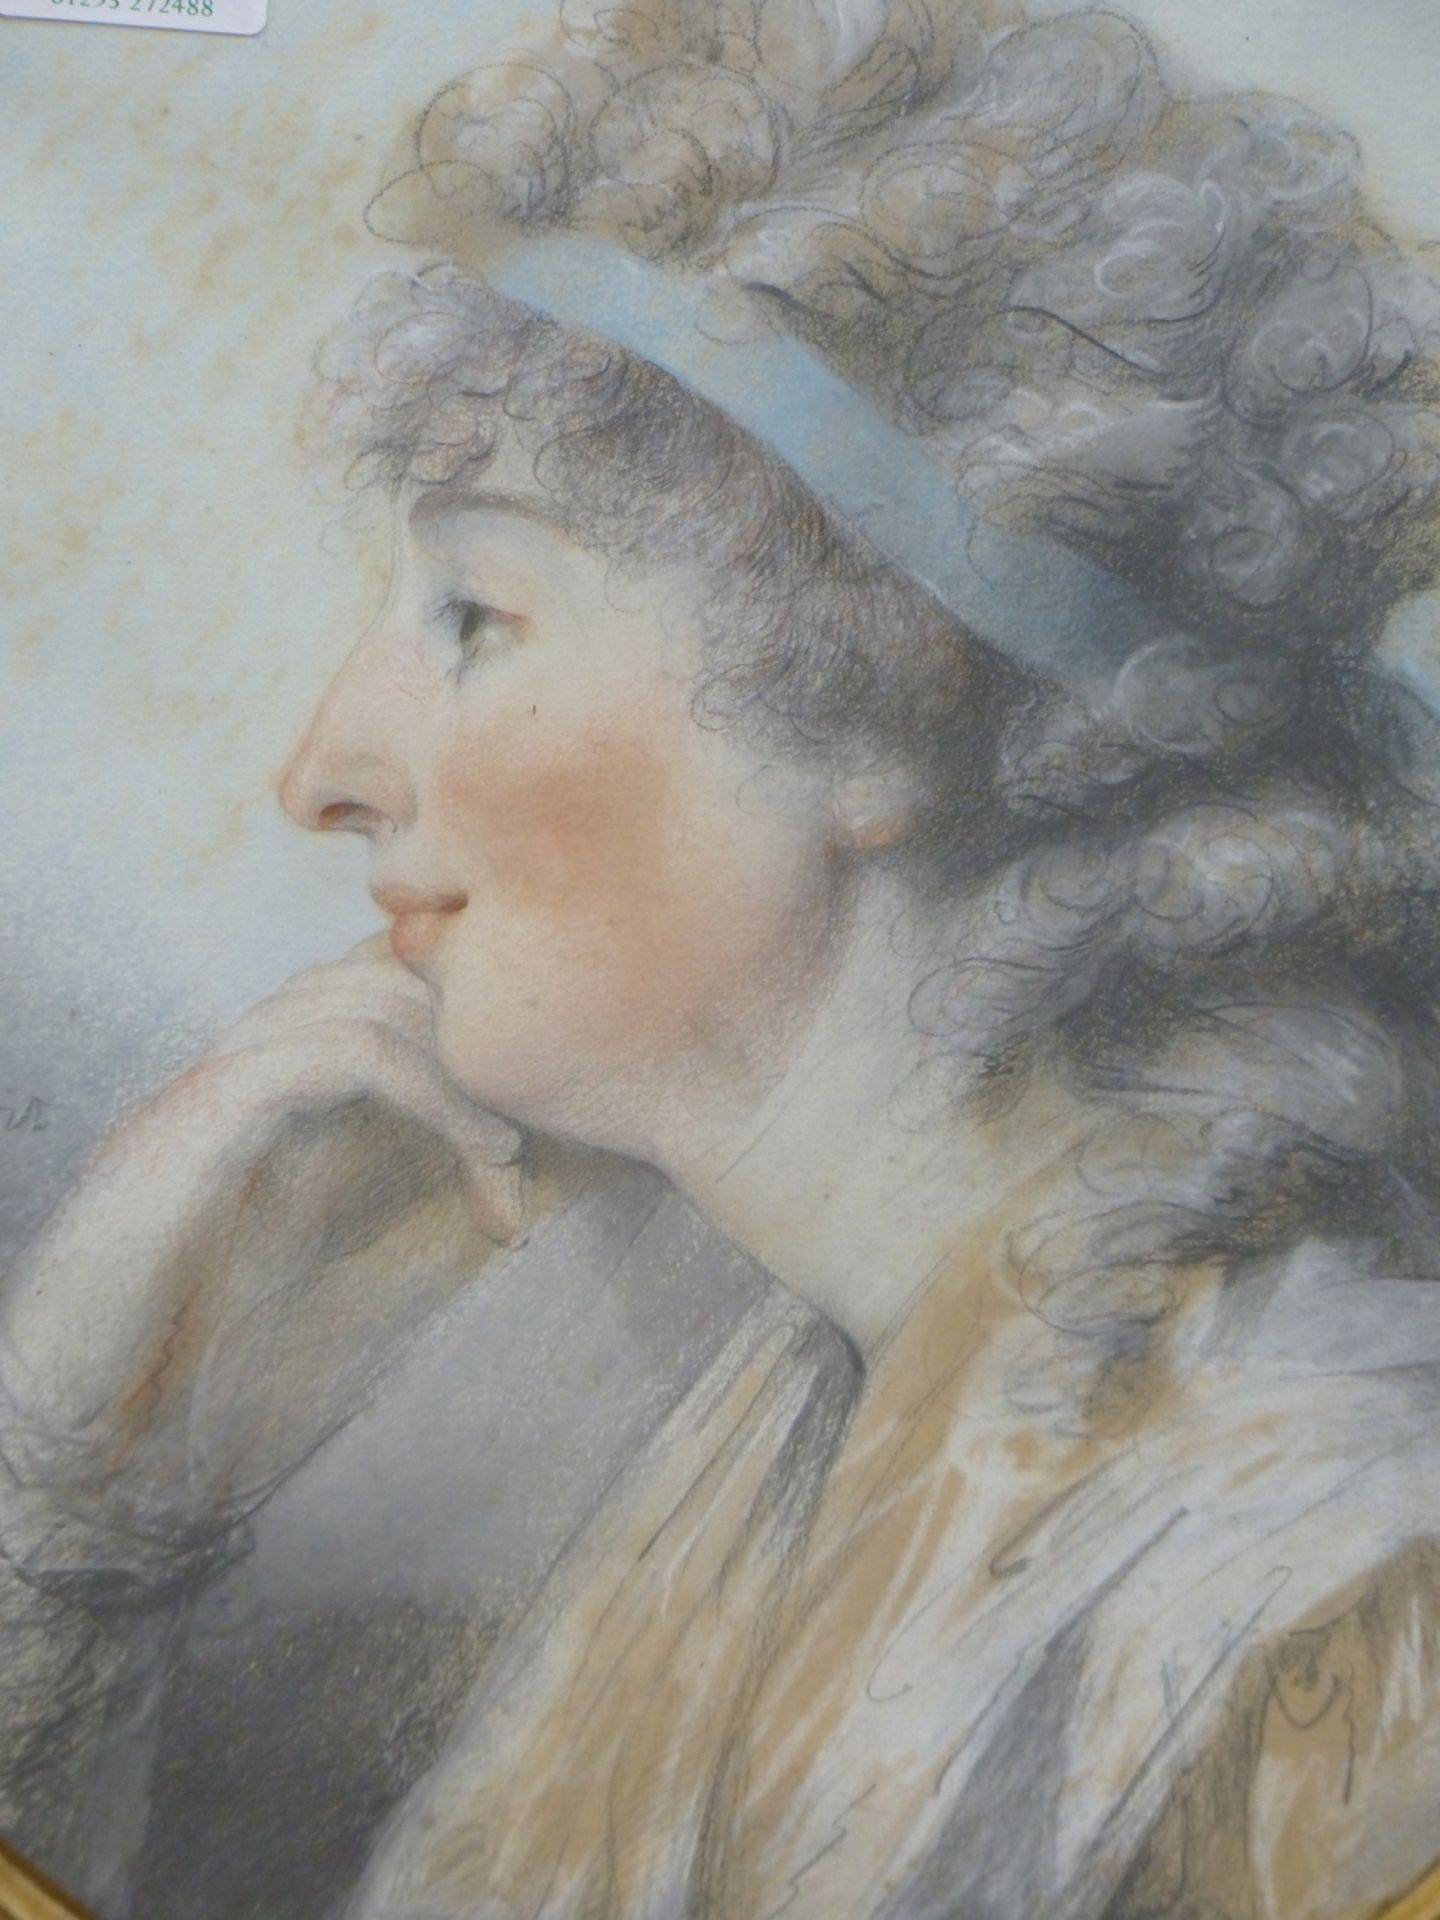 18TH/19TH CENTURY SCHOOL. PORTRAIT OF A CONTEMPLATIVE LADY. PASTEL. BEARS INSCRIPTION "PETERS - Image 2 of 8